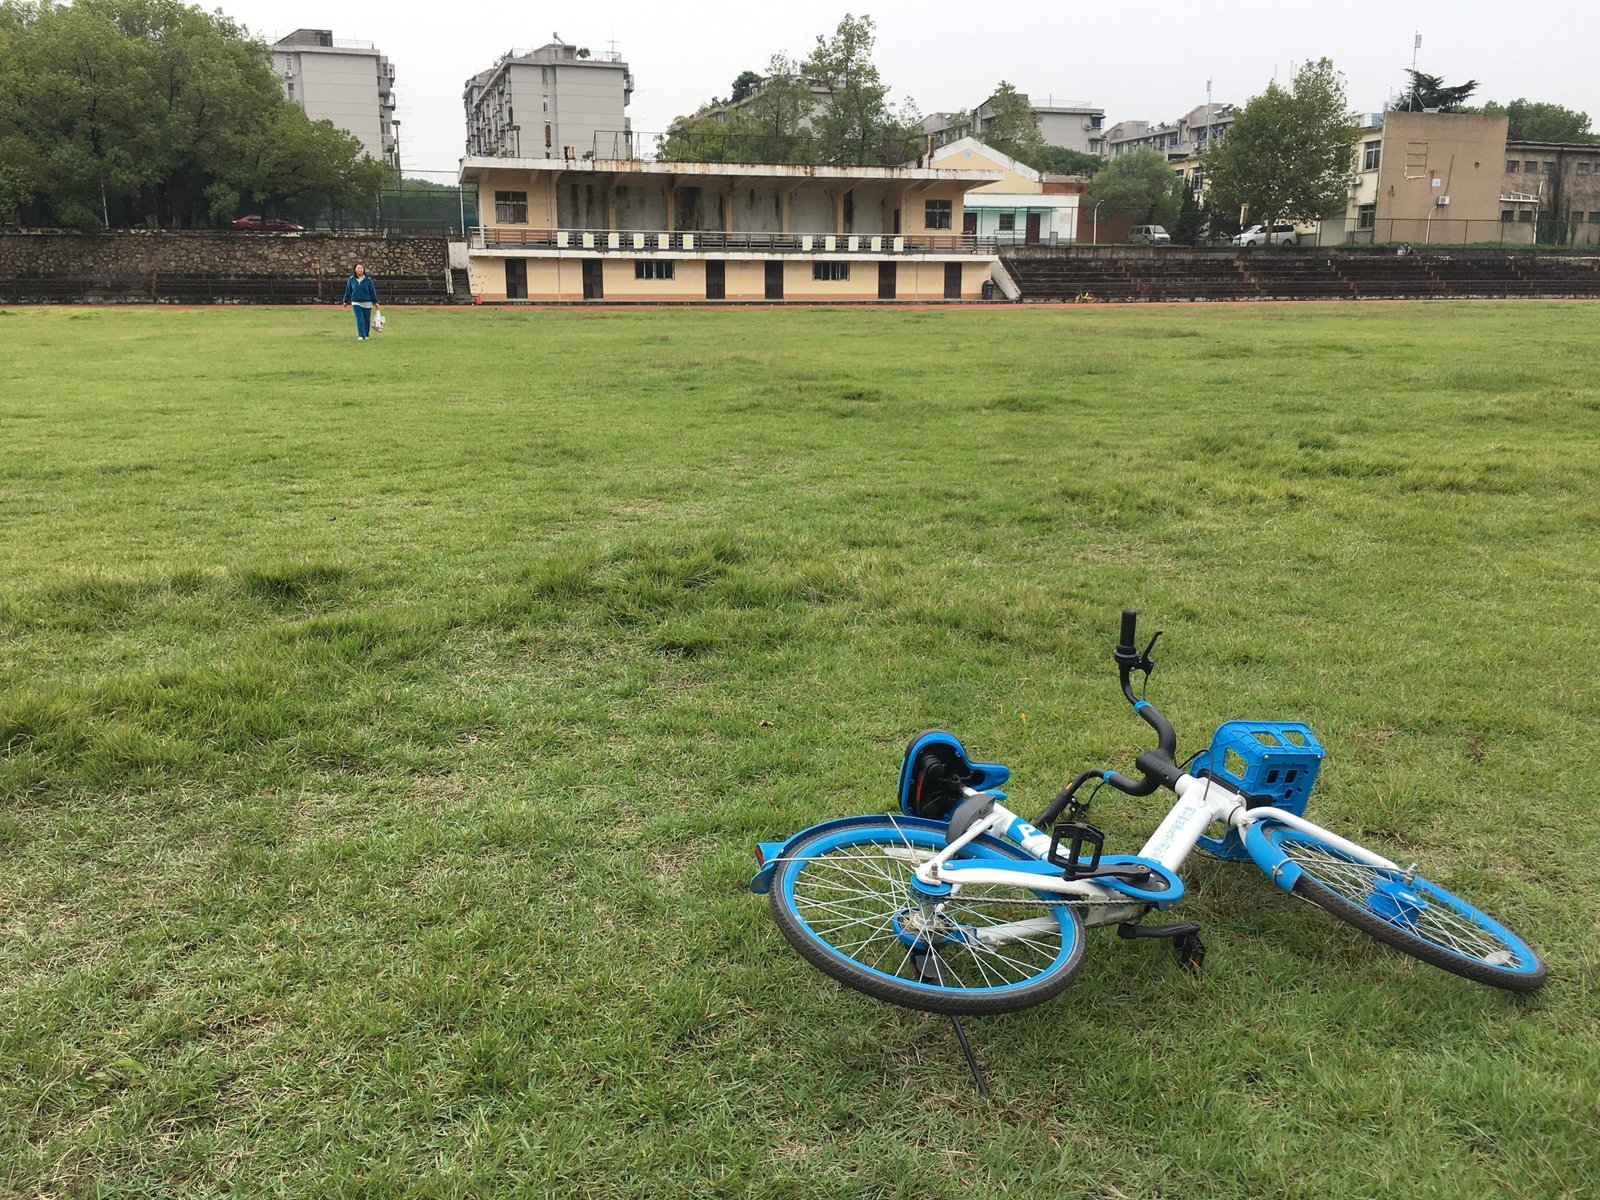 Shared bikes on the lawn